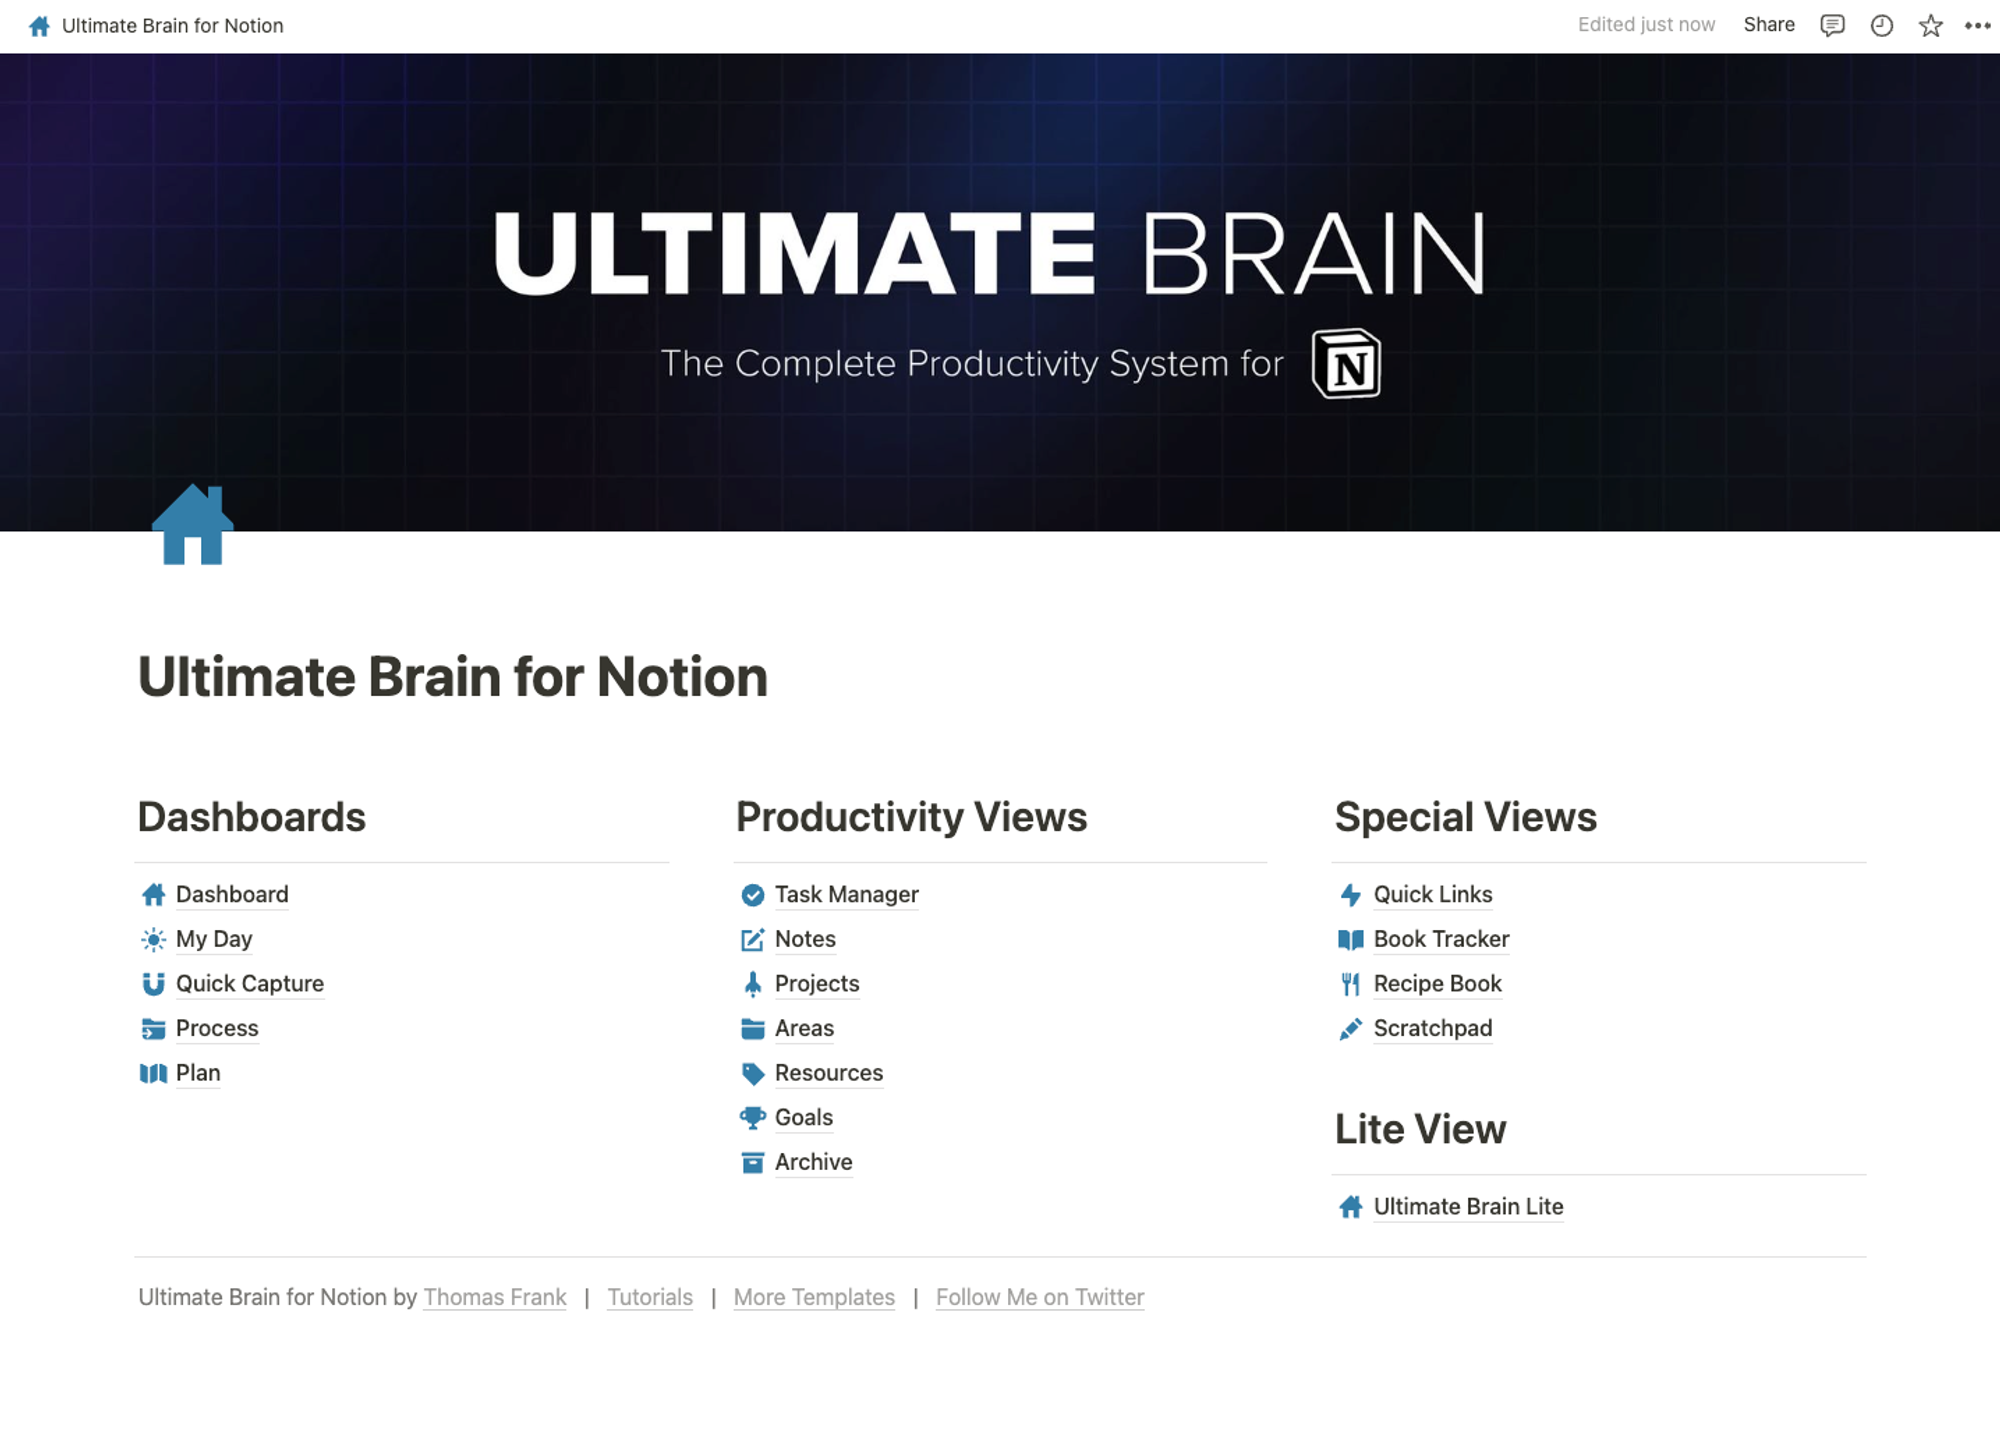 The new Ultimate Brain. If this is what you have, you’re on the latest version already.